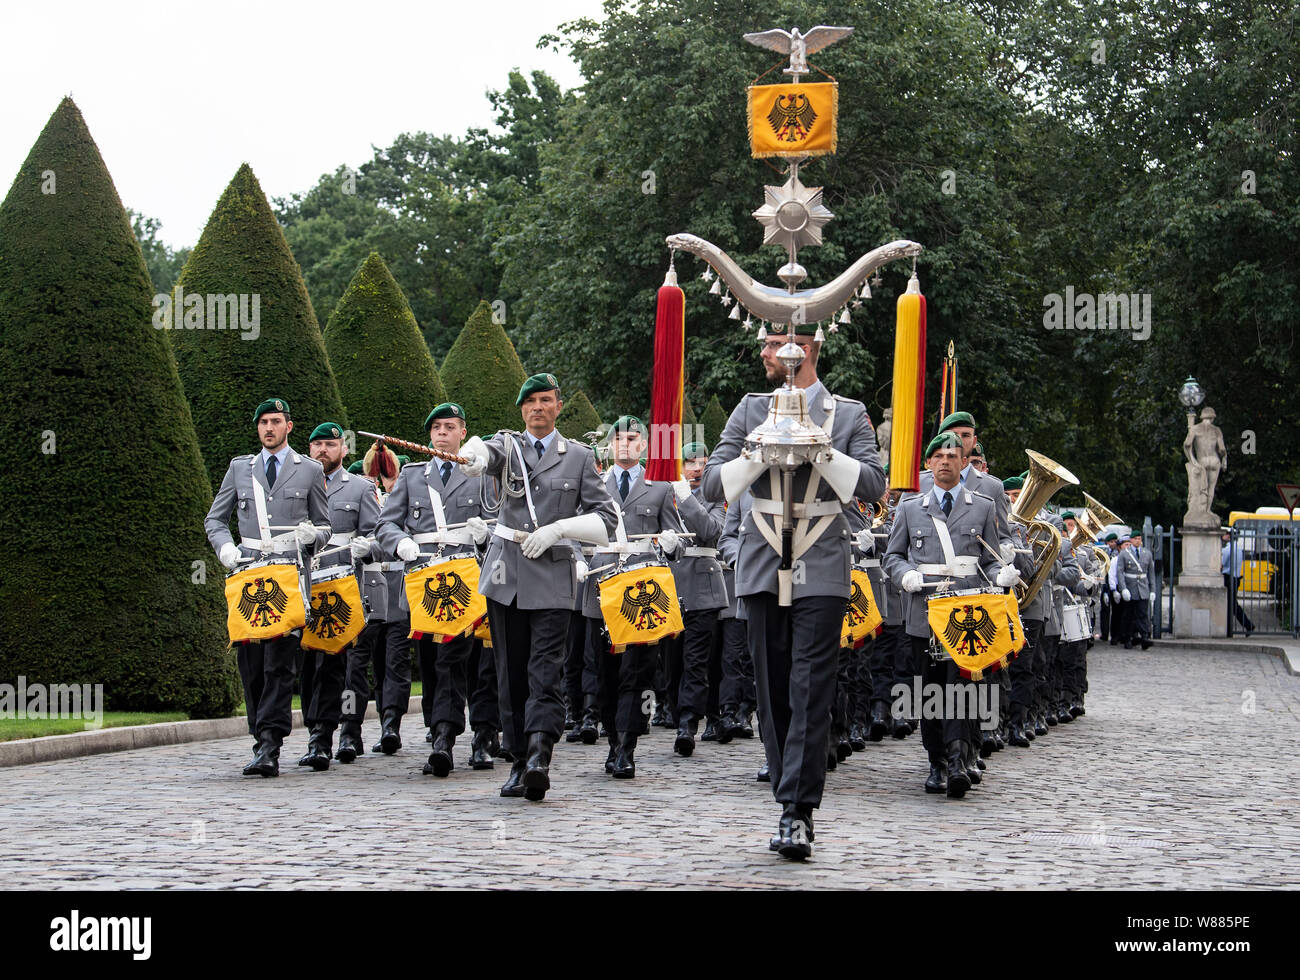 Berlin, Germany. 08th Aug, 2019. The Bundeswehr Staff Music Corps marches through the entrance to Schloss Bellevue before the Portuguese President is greeted by the Federal President. The Staff Music Corps is responsible for welcoming the state guests of the Federal President, the Federal Chancellor and the Ministry of Defence. Credit: Bernd von Jutrczenka/dpa/Alamy Live News Stock Photo